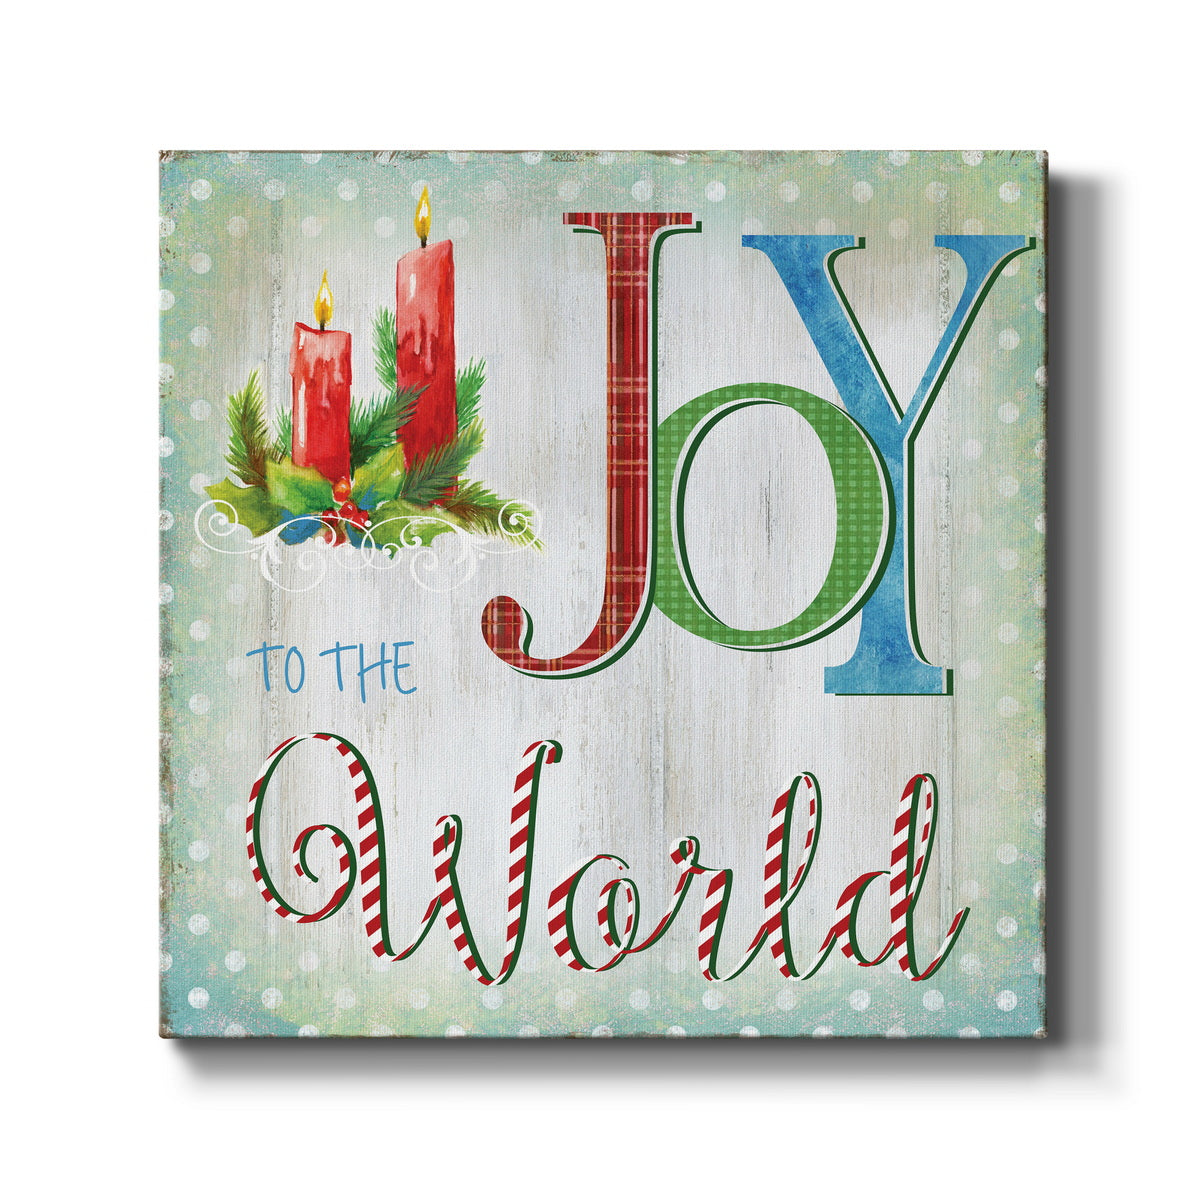 Candle Joy-Premium Gallery Wrapped Canvas - Ready to Hang